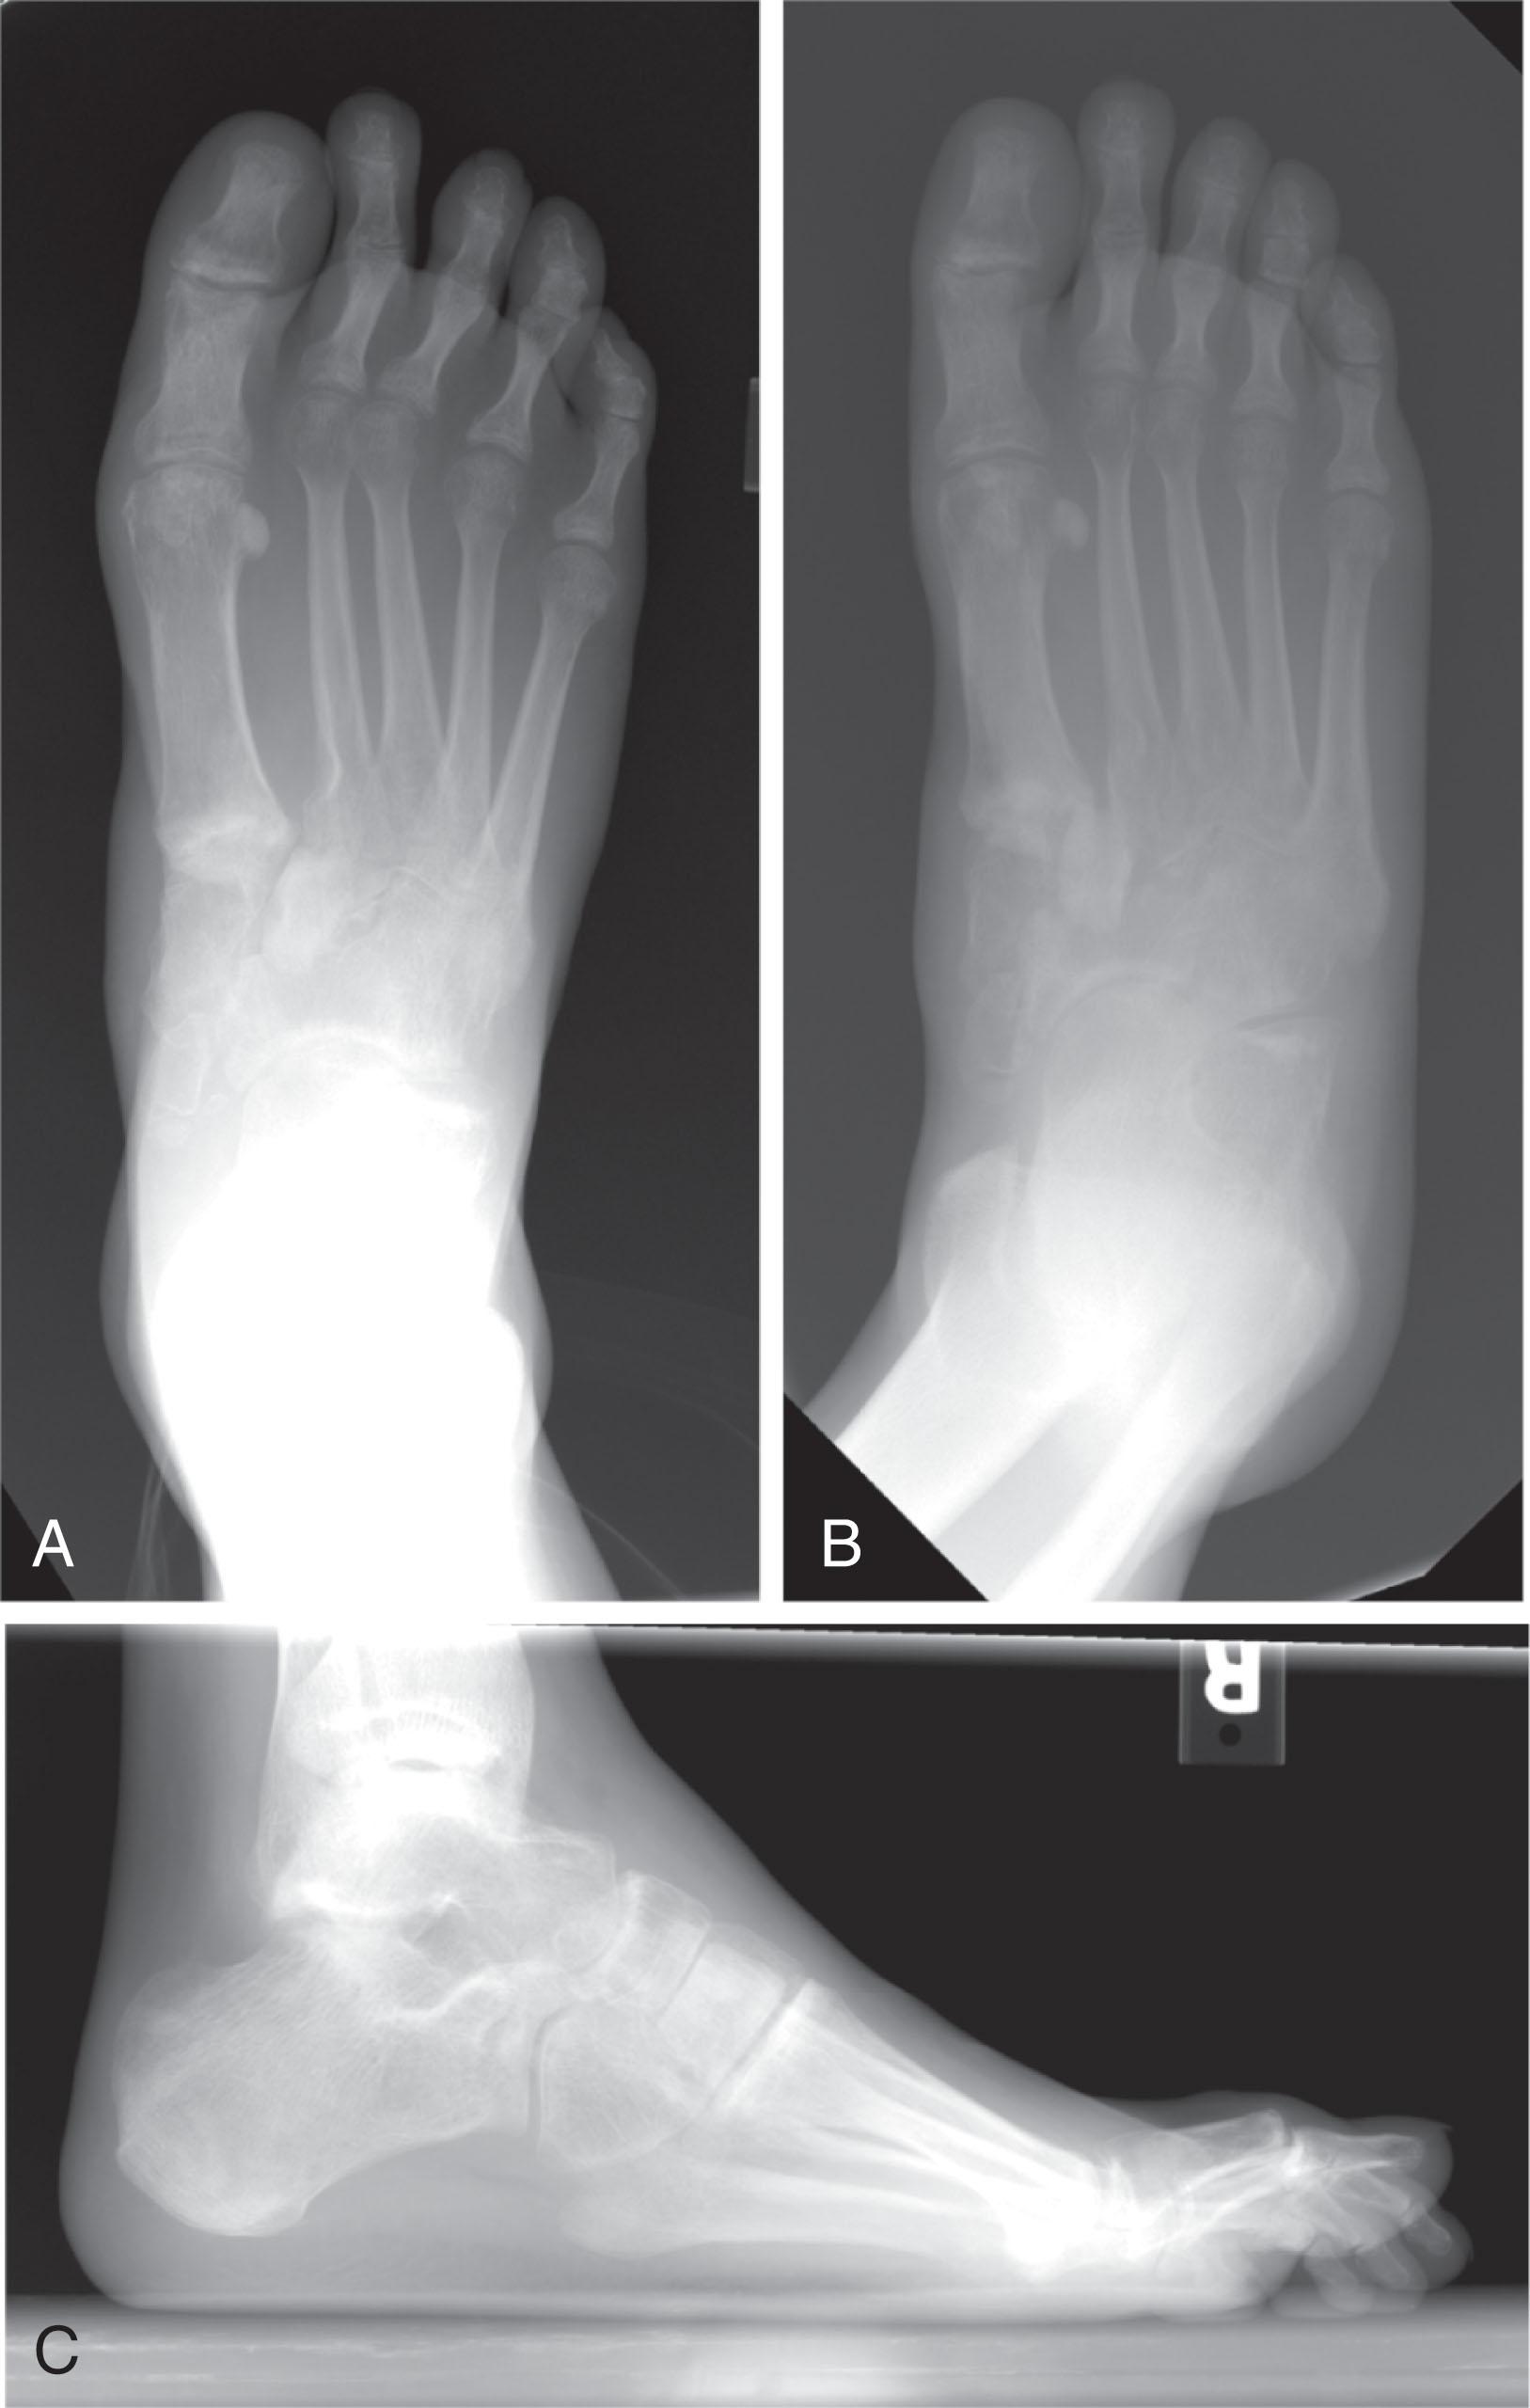 Fig. 47-8, Anteroposterior (A) , oblique (B) , and lateral (C) radiographs of chronic, untreated, longitudinal midtarsal injury with navicular fracture and shortening of the medial column. Patient presented with cock-up hallux deformity, pain beneath first metatarsal head, and lesser metatarsalgia.